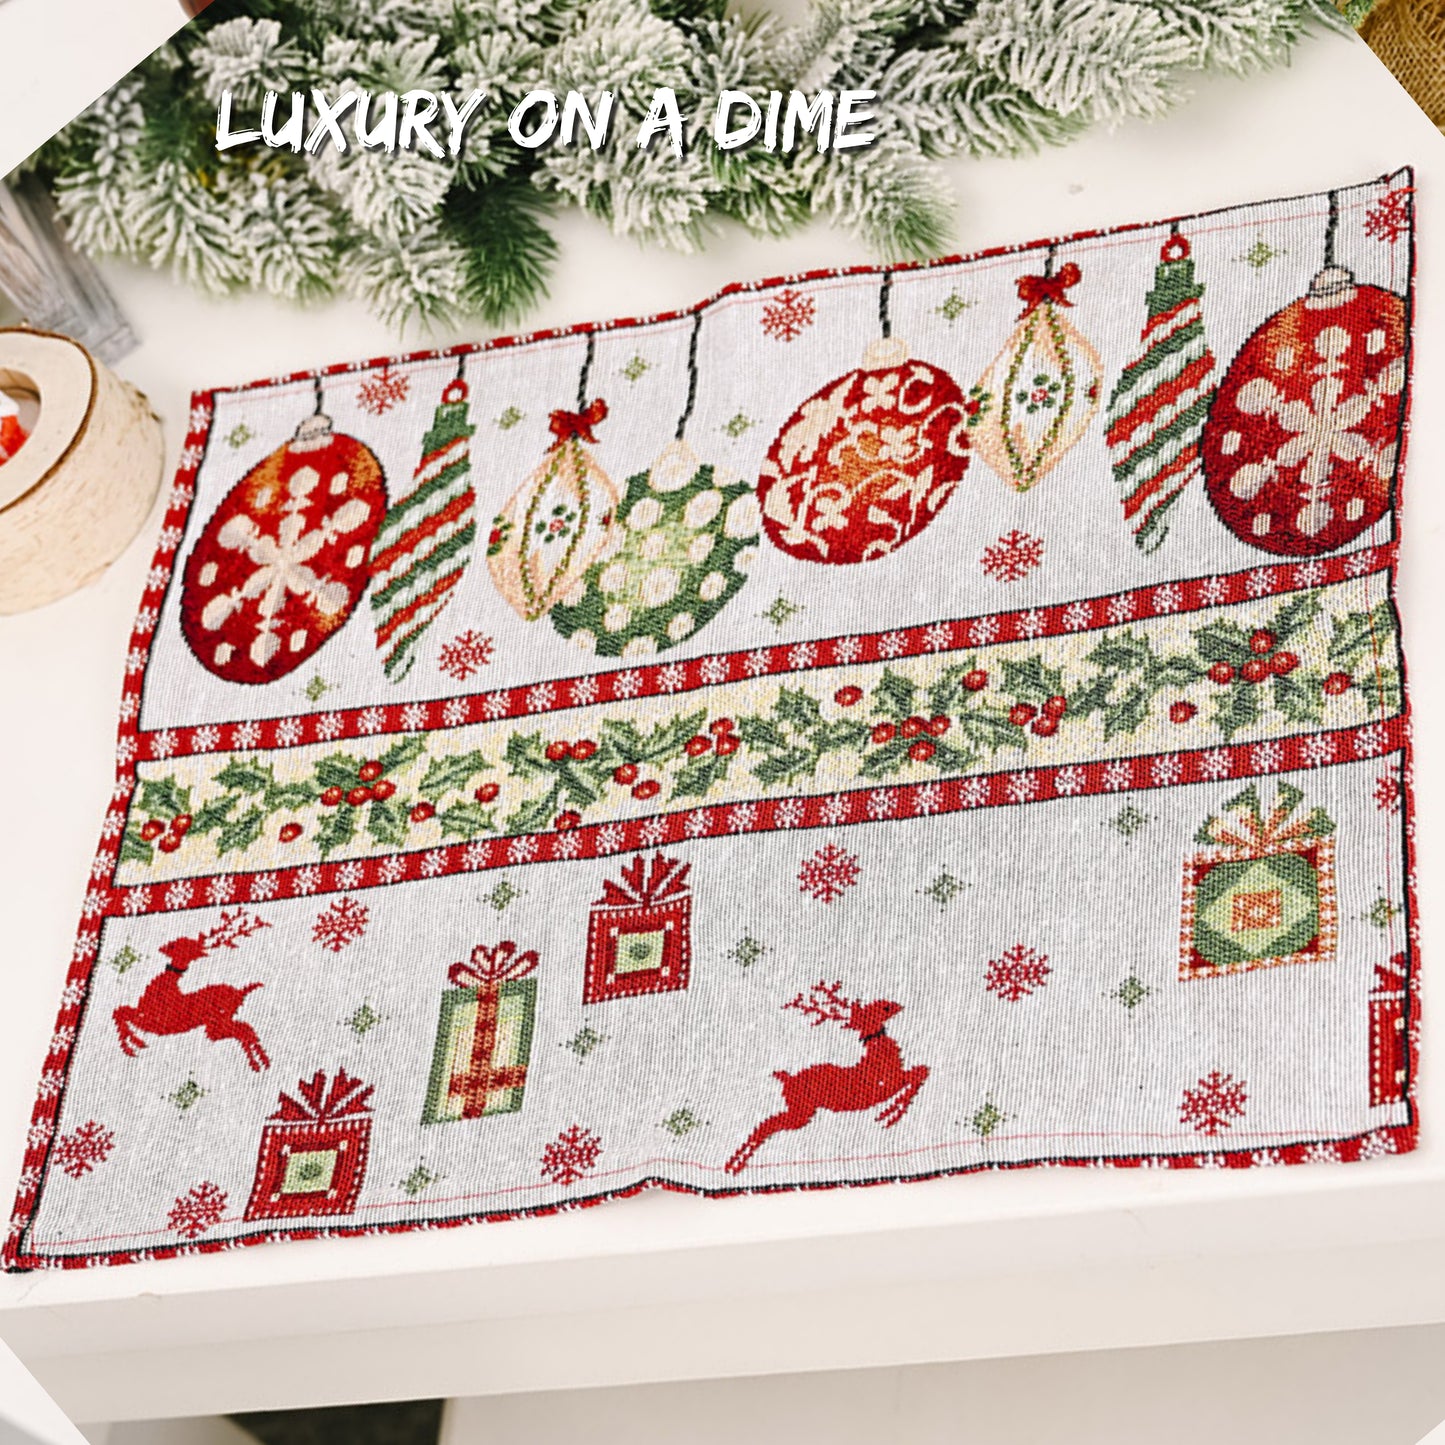 2-Piece Christmas Placemat Dining Table Festive Home Decor Assorted Selection